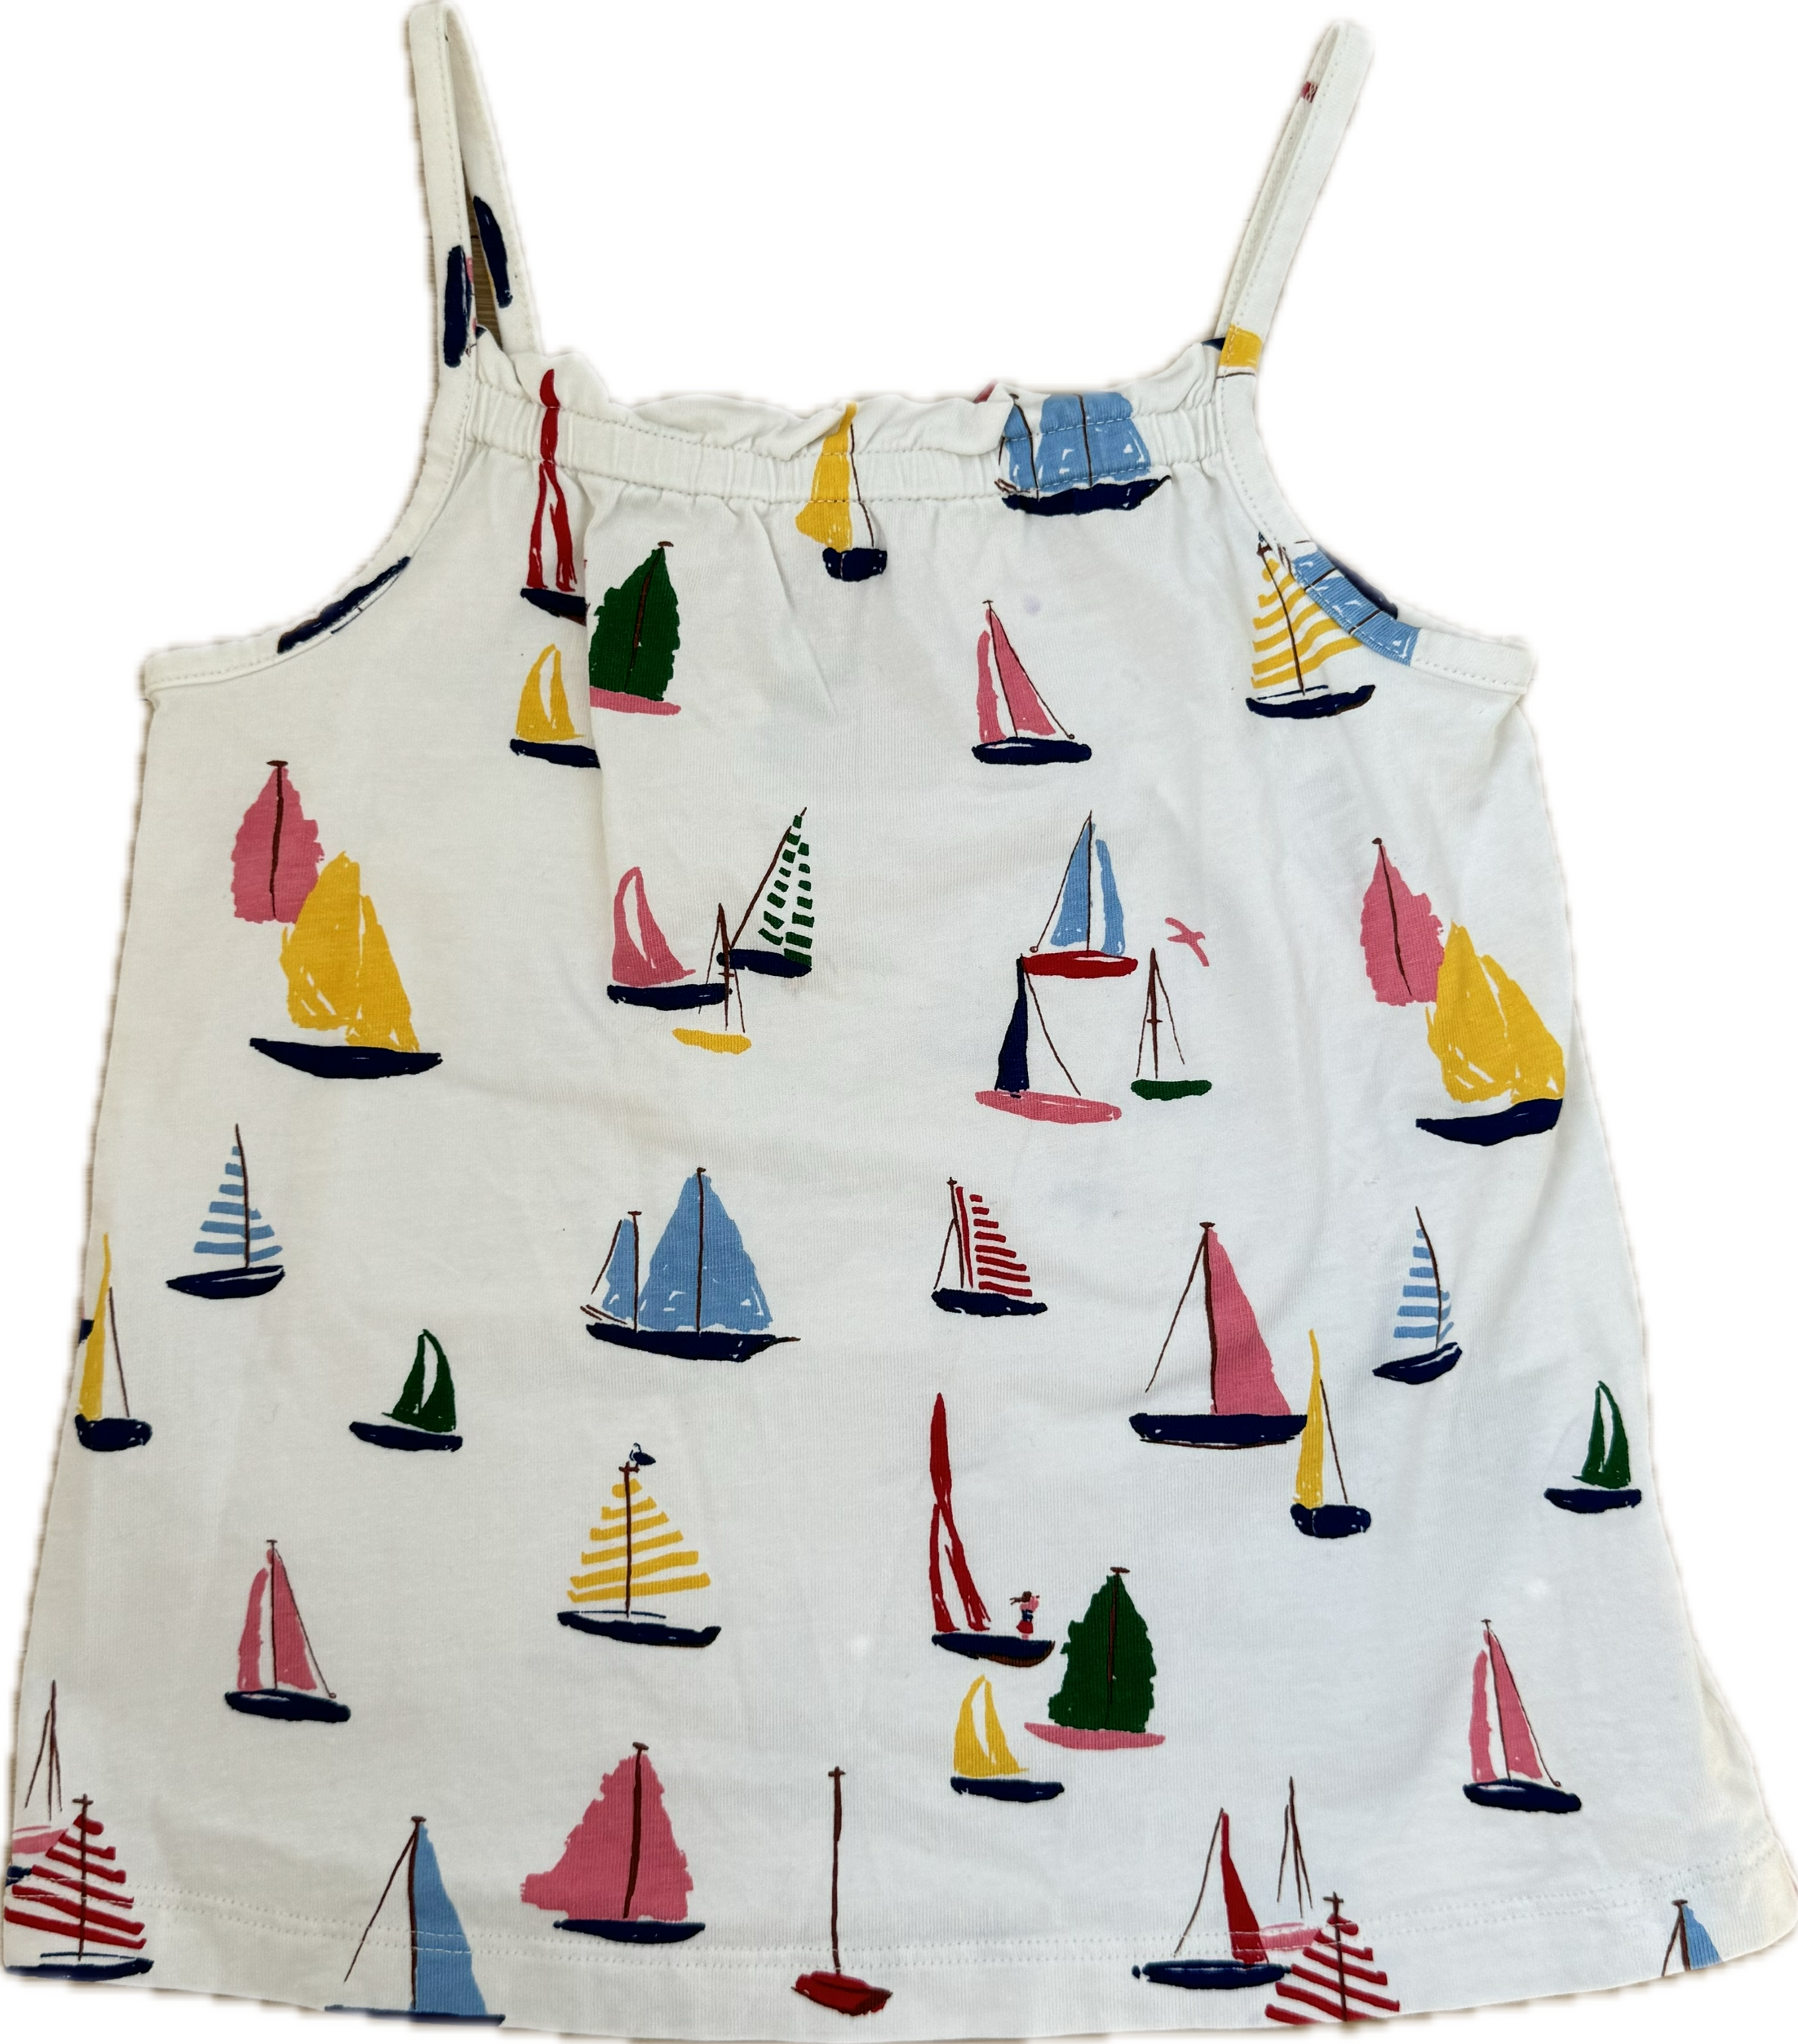 Hanna Andersson Sailboat Tank, White Girls Size 100